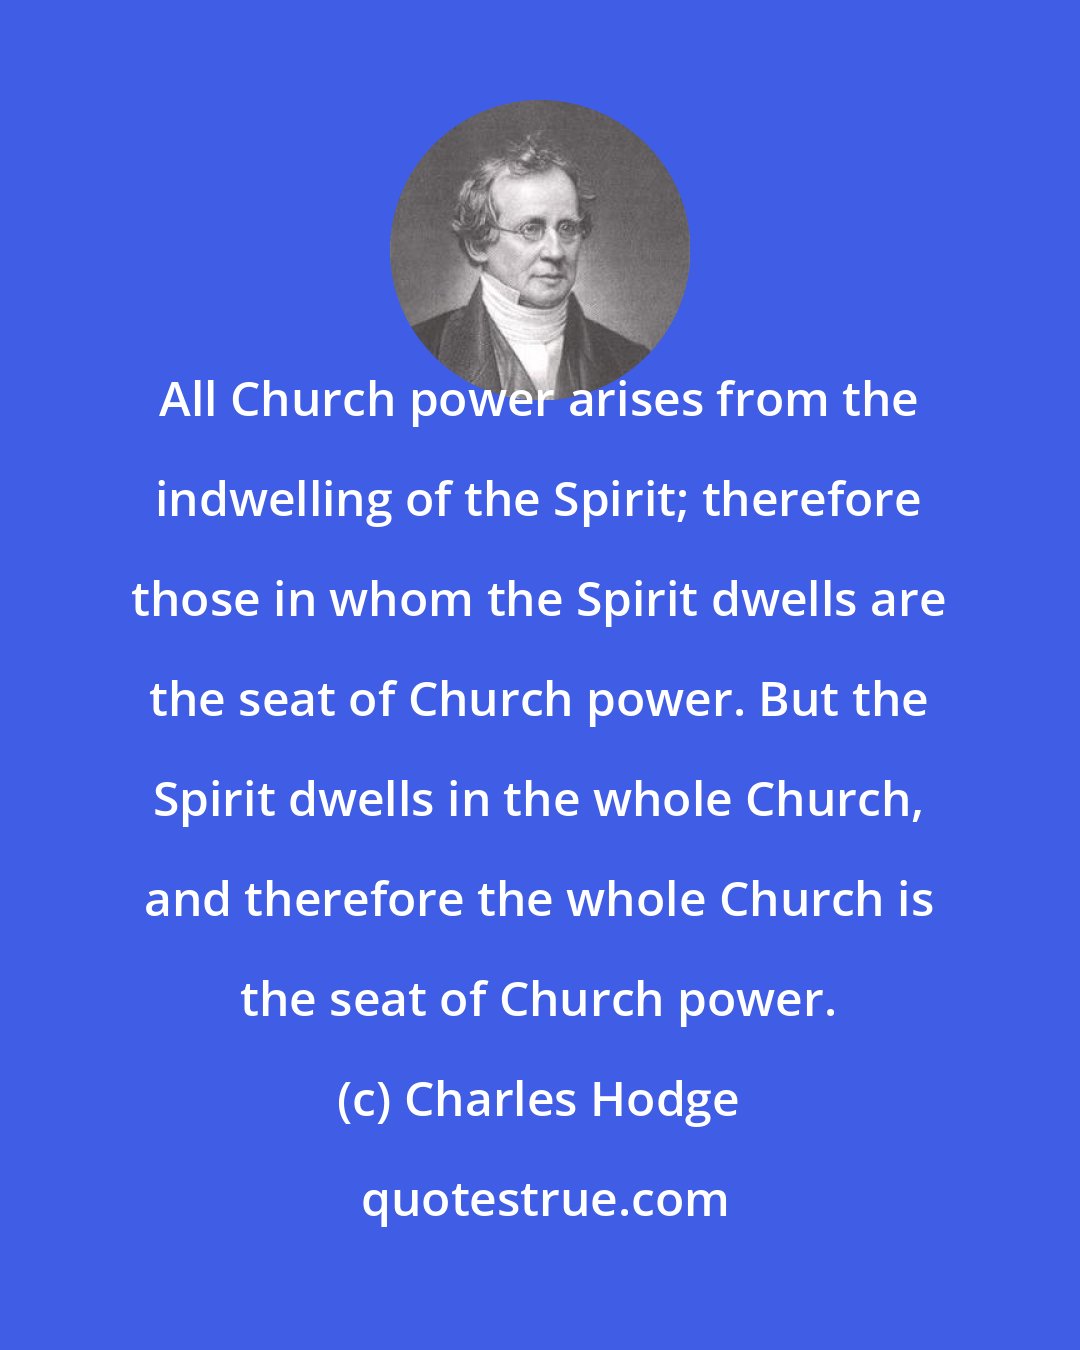 Charles Hodge: All Church power arises from the indwelling of the Spirit; therefore those in whom the Spirit dwells are the seat of Church power. But the Spirit dwells in the whole Church, and therefore the whole Church is the seat of Church power.